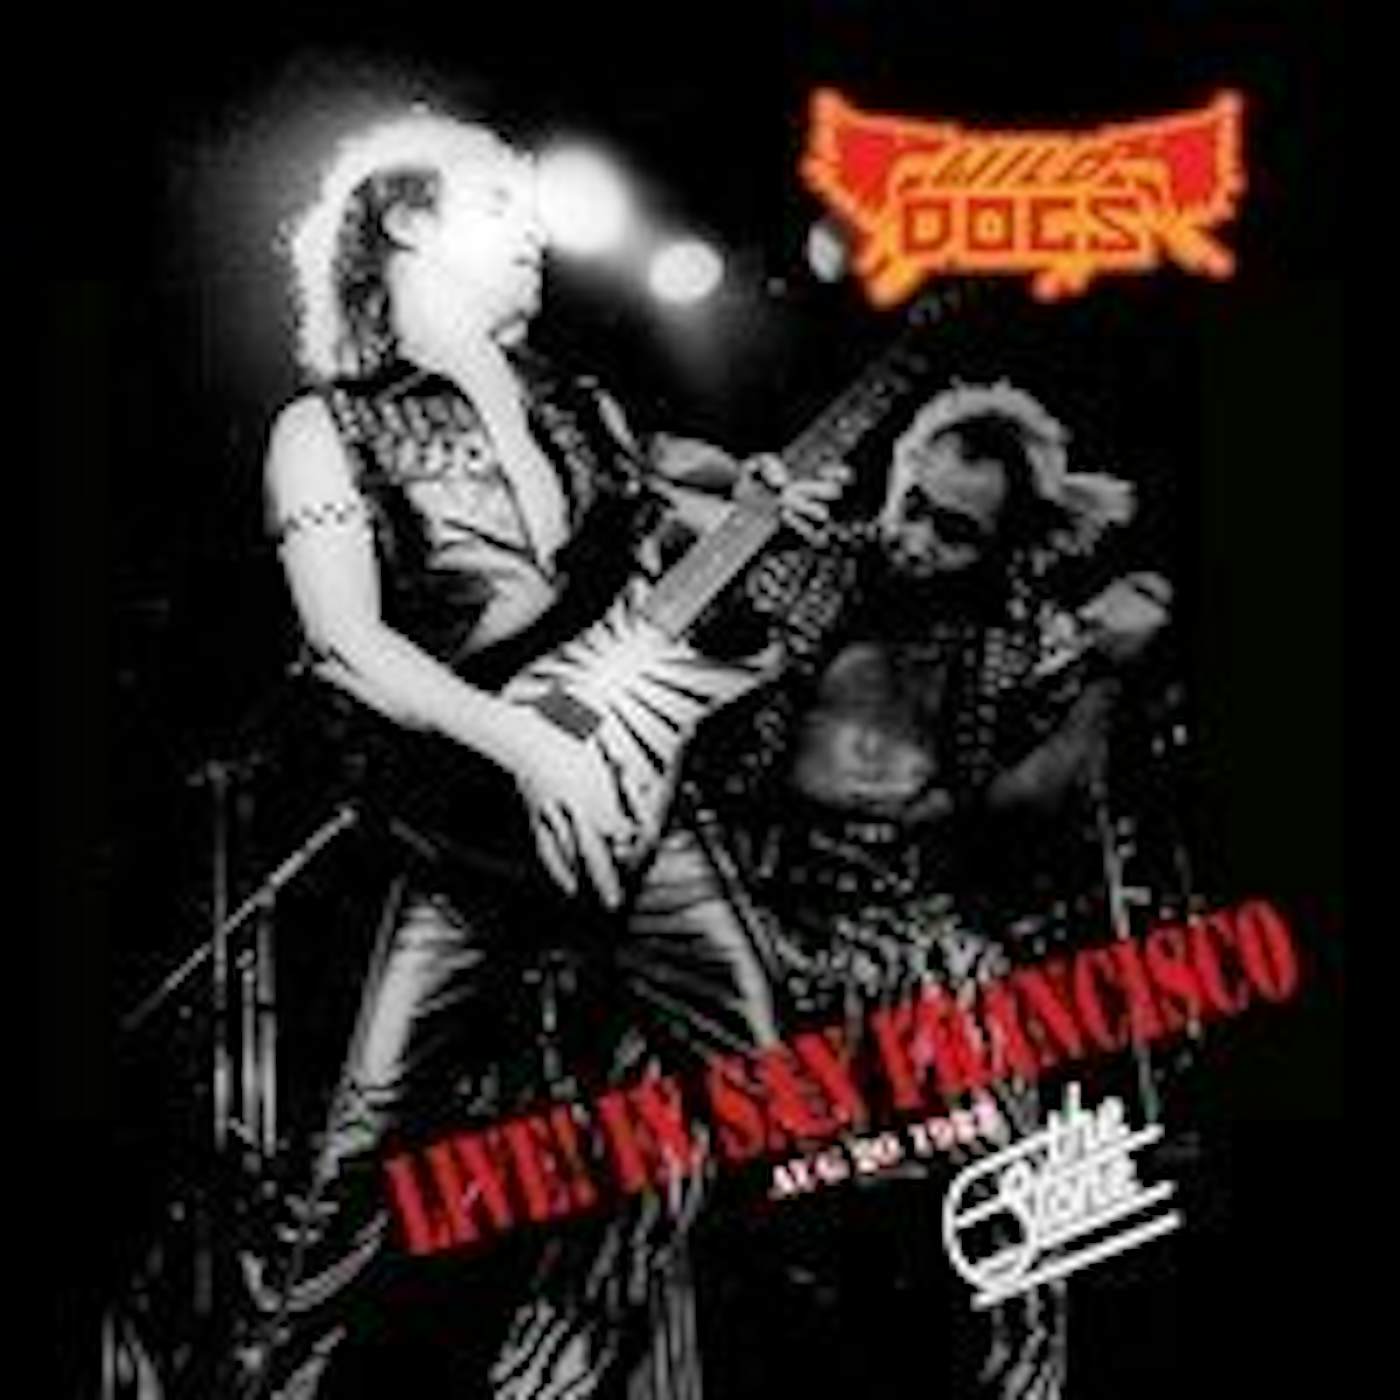 Wild Dogs LIVE IN SAN FRANCISCO AUG 20 1982 CD